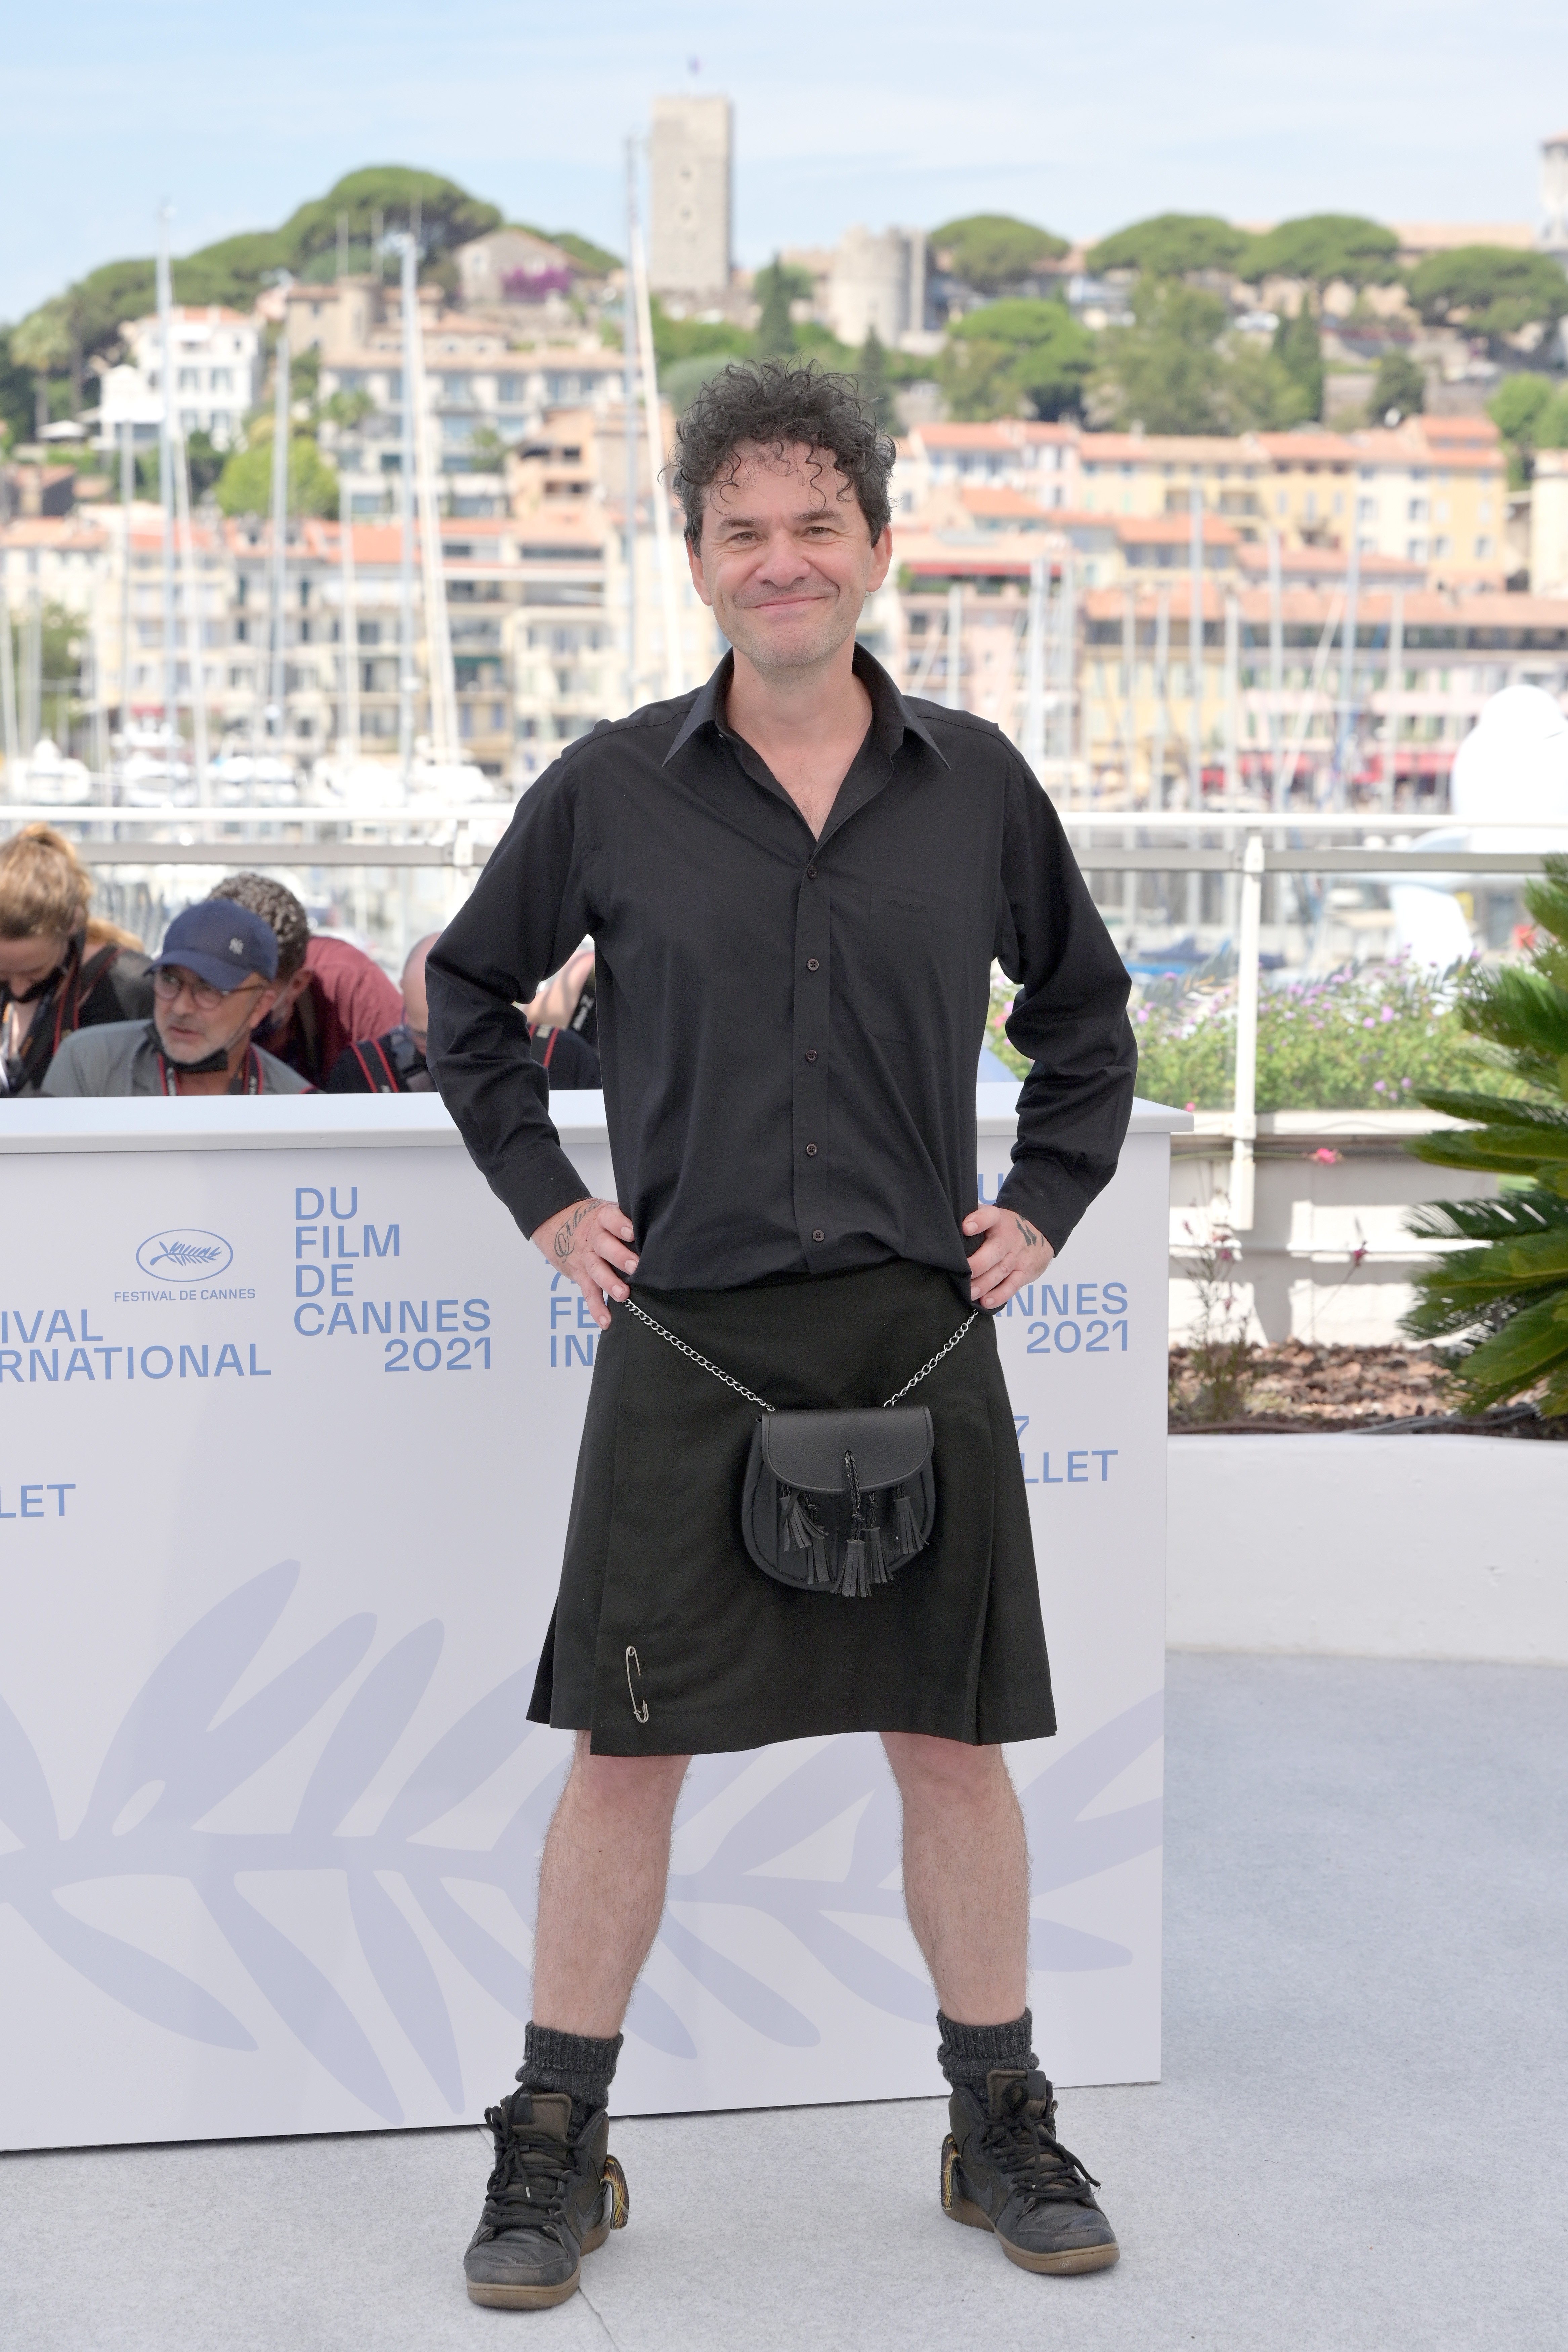 CANNES, FRANCE - JULY 07: Mark Cousins attends "The Story of Film: A New Generation" photocall during the 74th annual Cannes Film Festival on July 07, 2021 in Cannes, France. (Photo by Lionel Hahn/Getty Images) (Foto: Getty Images)